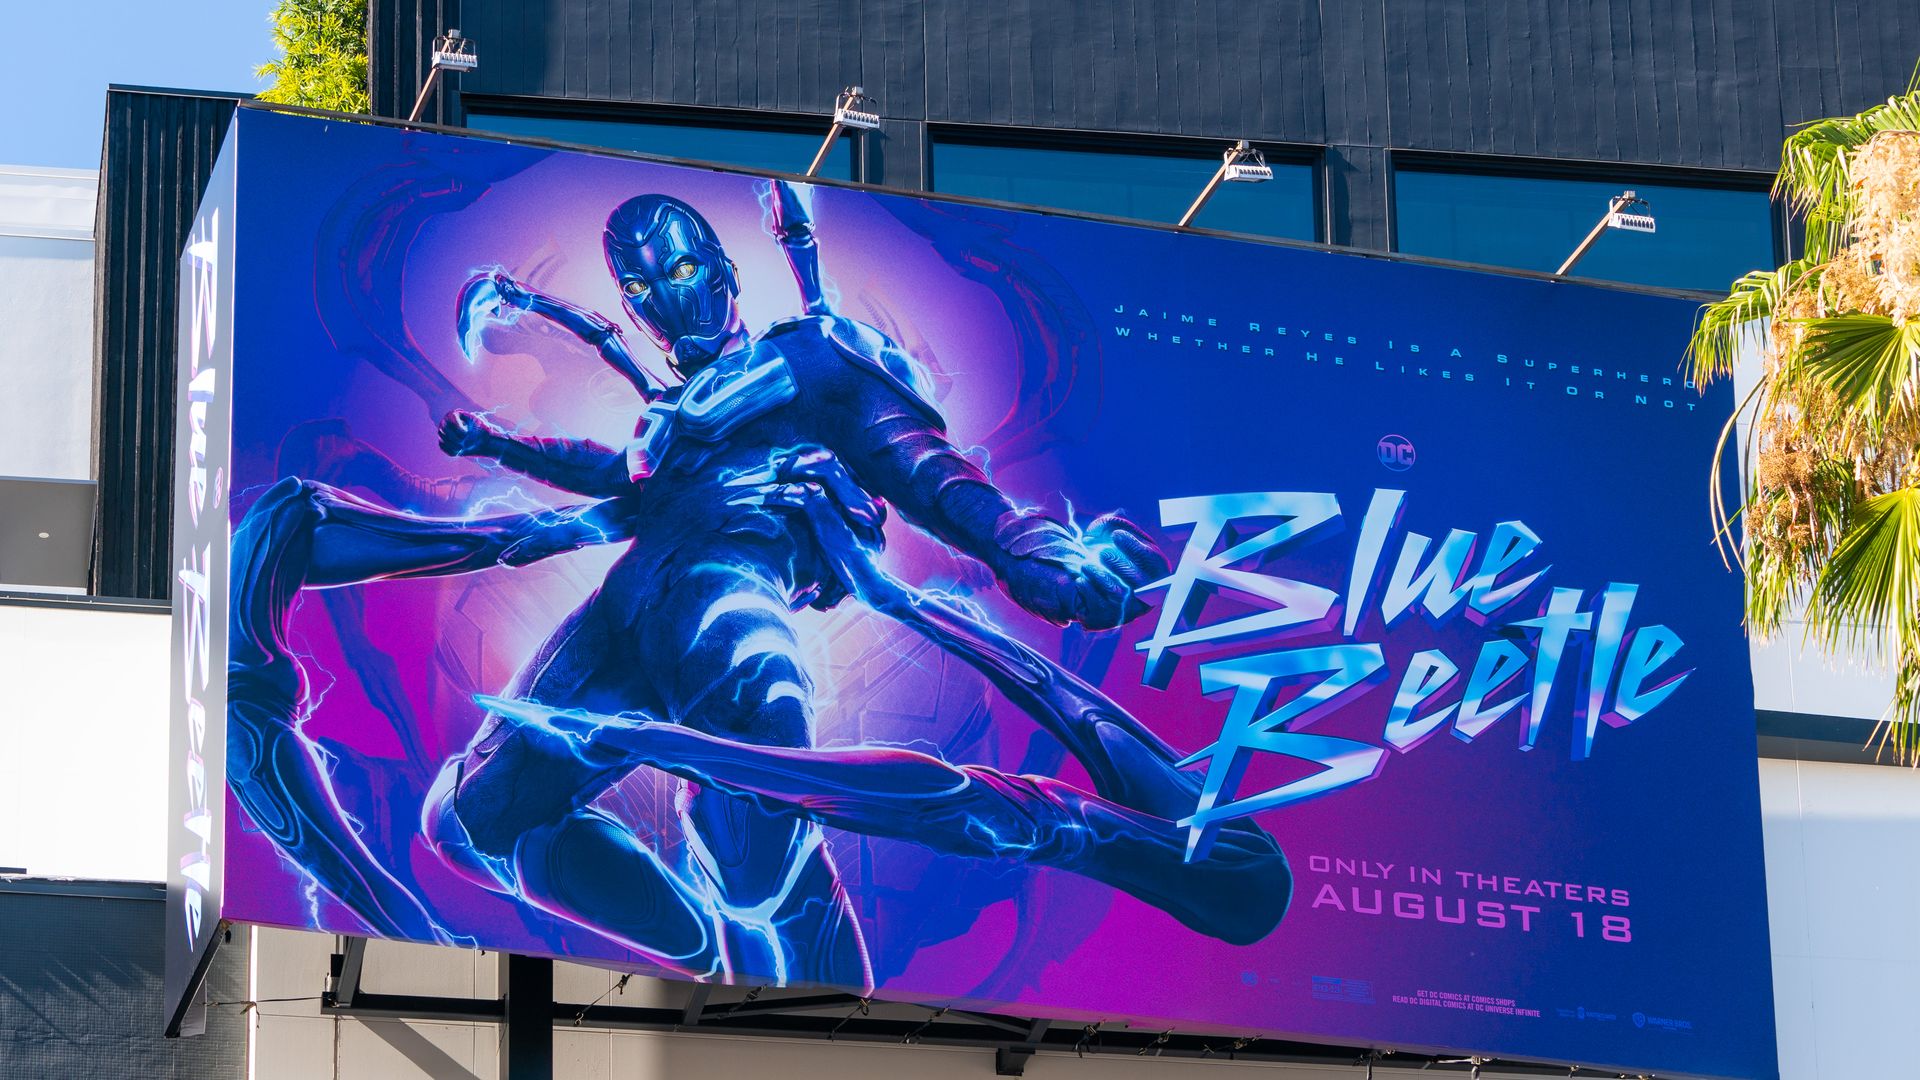 A billboard promotes the release of Blue Beetle, written in electric blue font beside the super hero. 